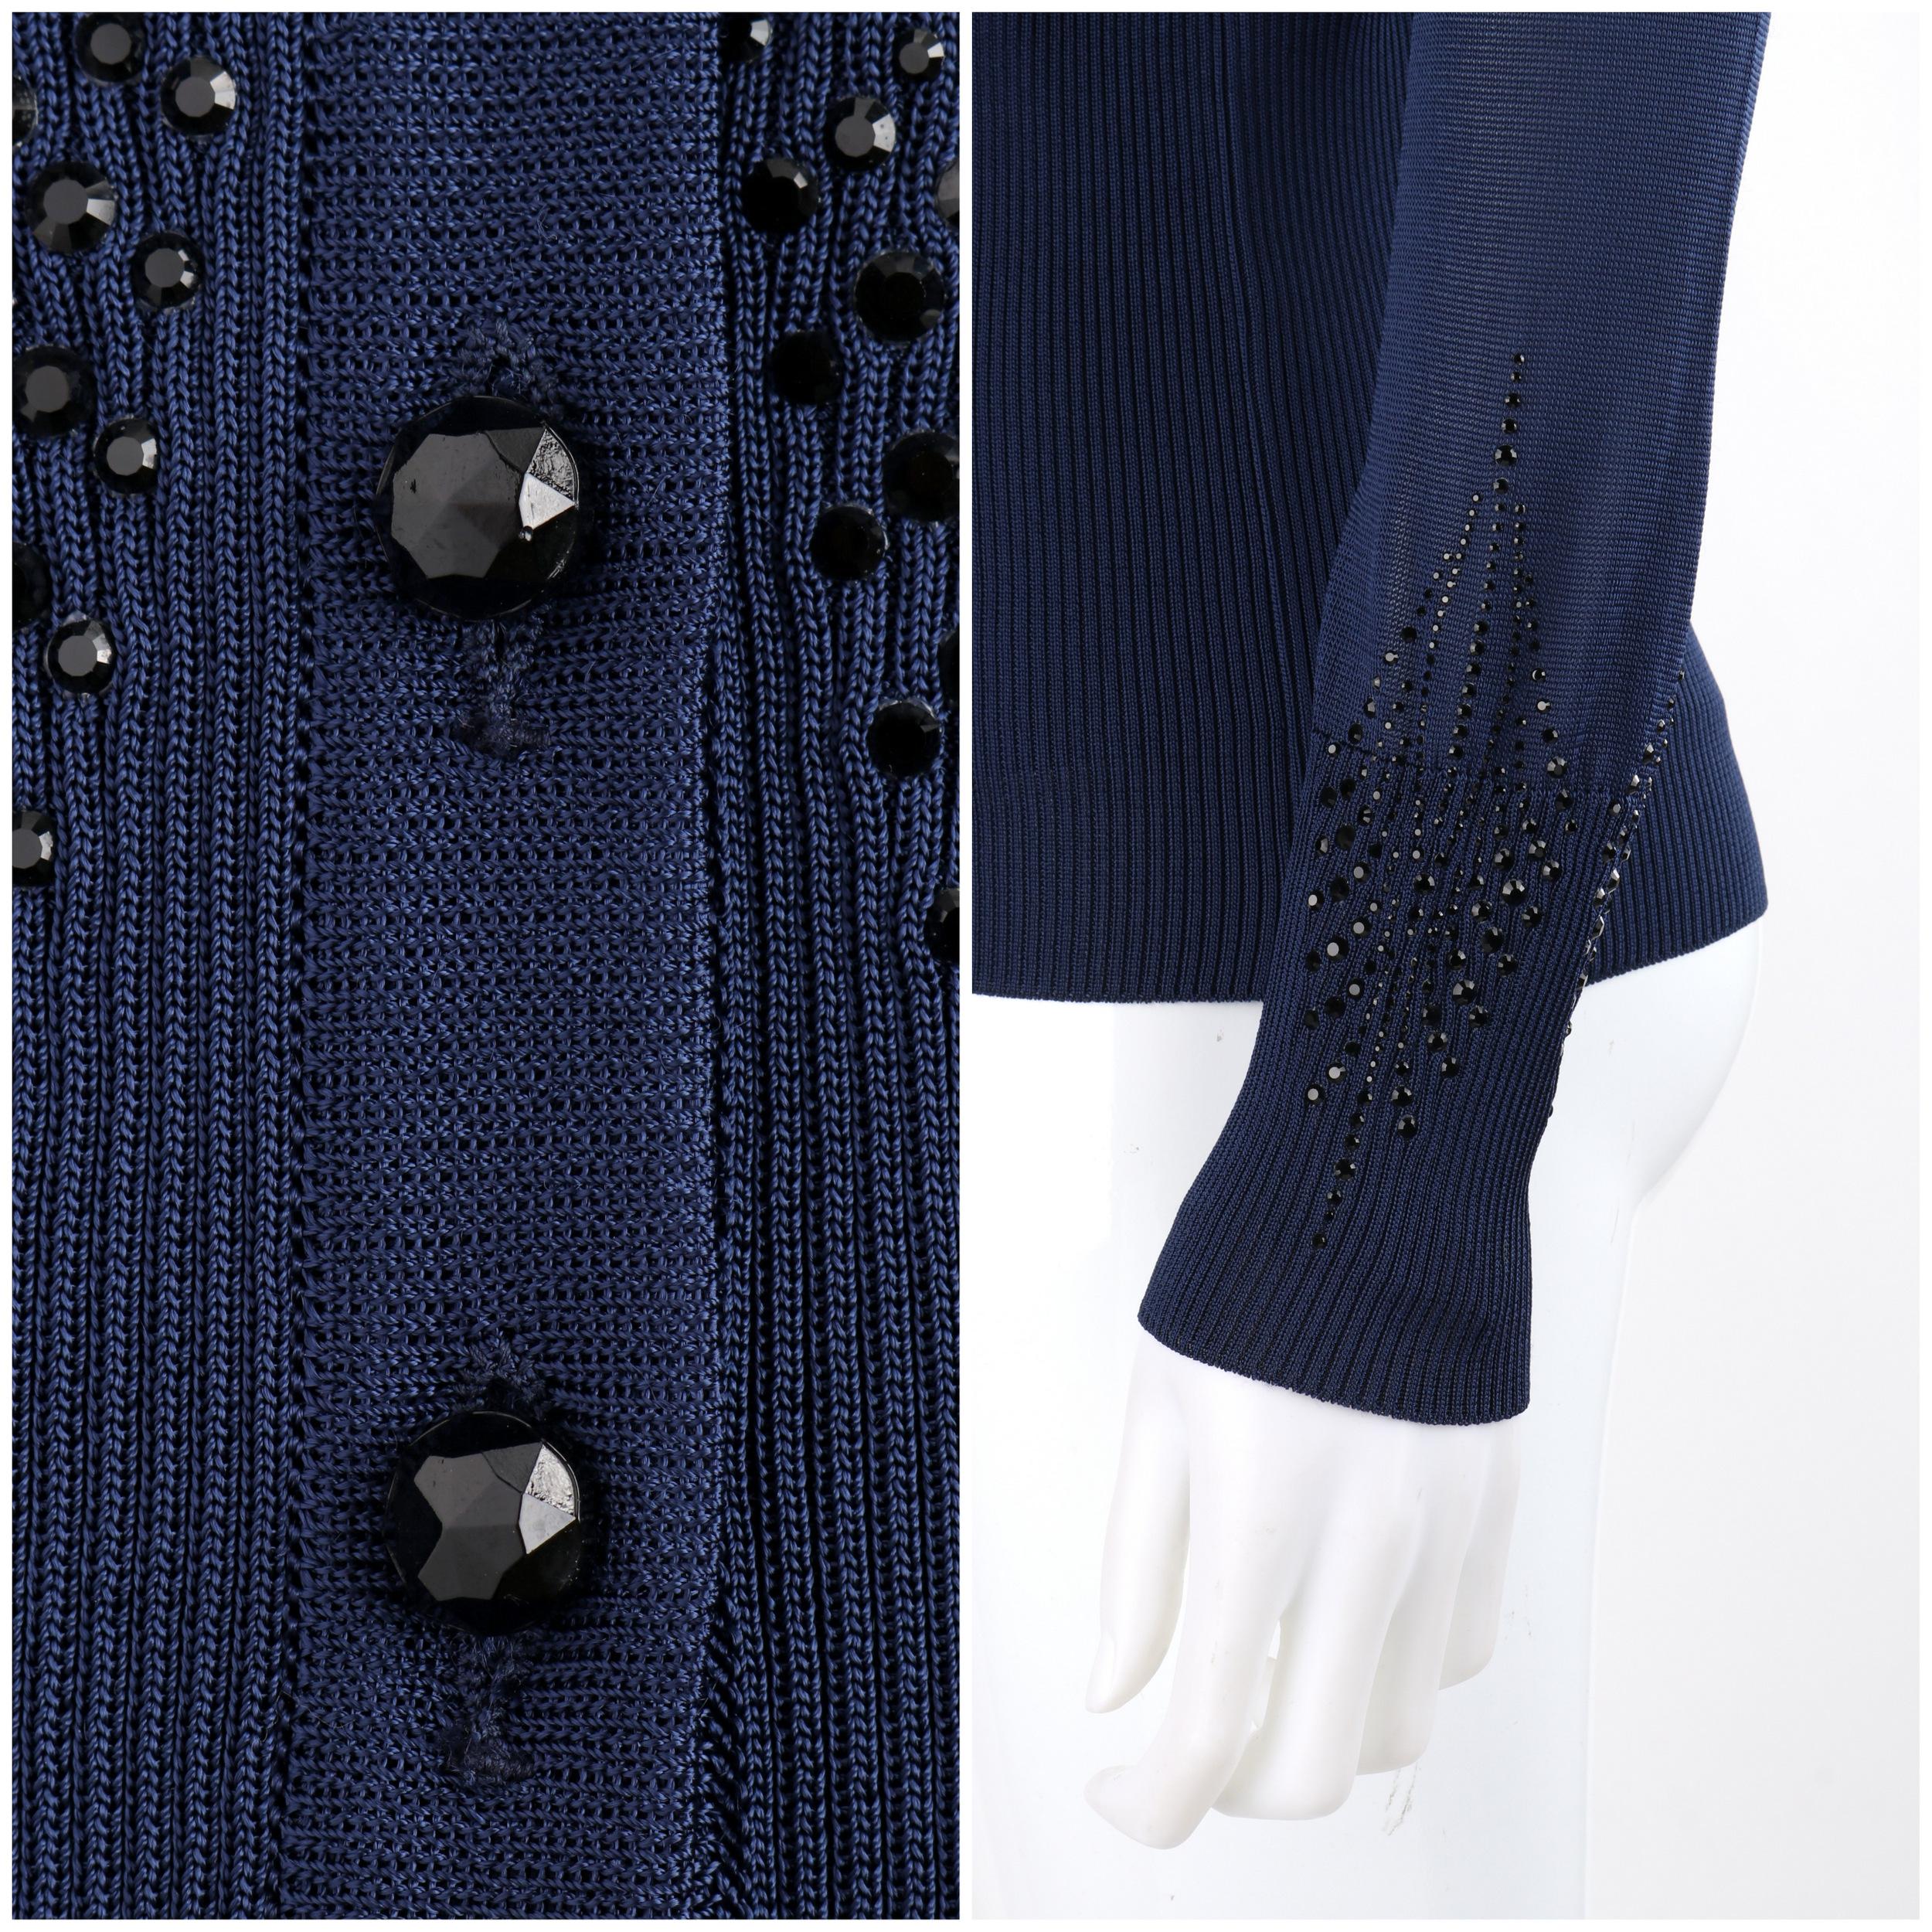 GIVENCHY Couture A/W 1998 ALEXANDER McQUEEN Embellished Knit Top Cardigan Set For Sale 2